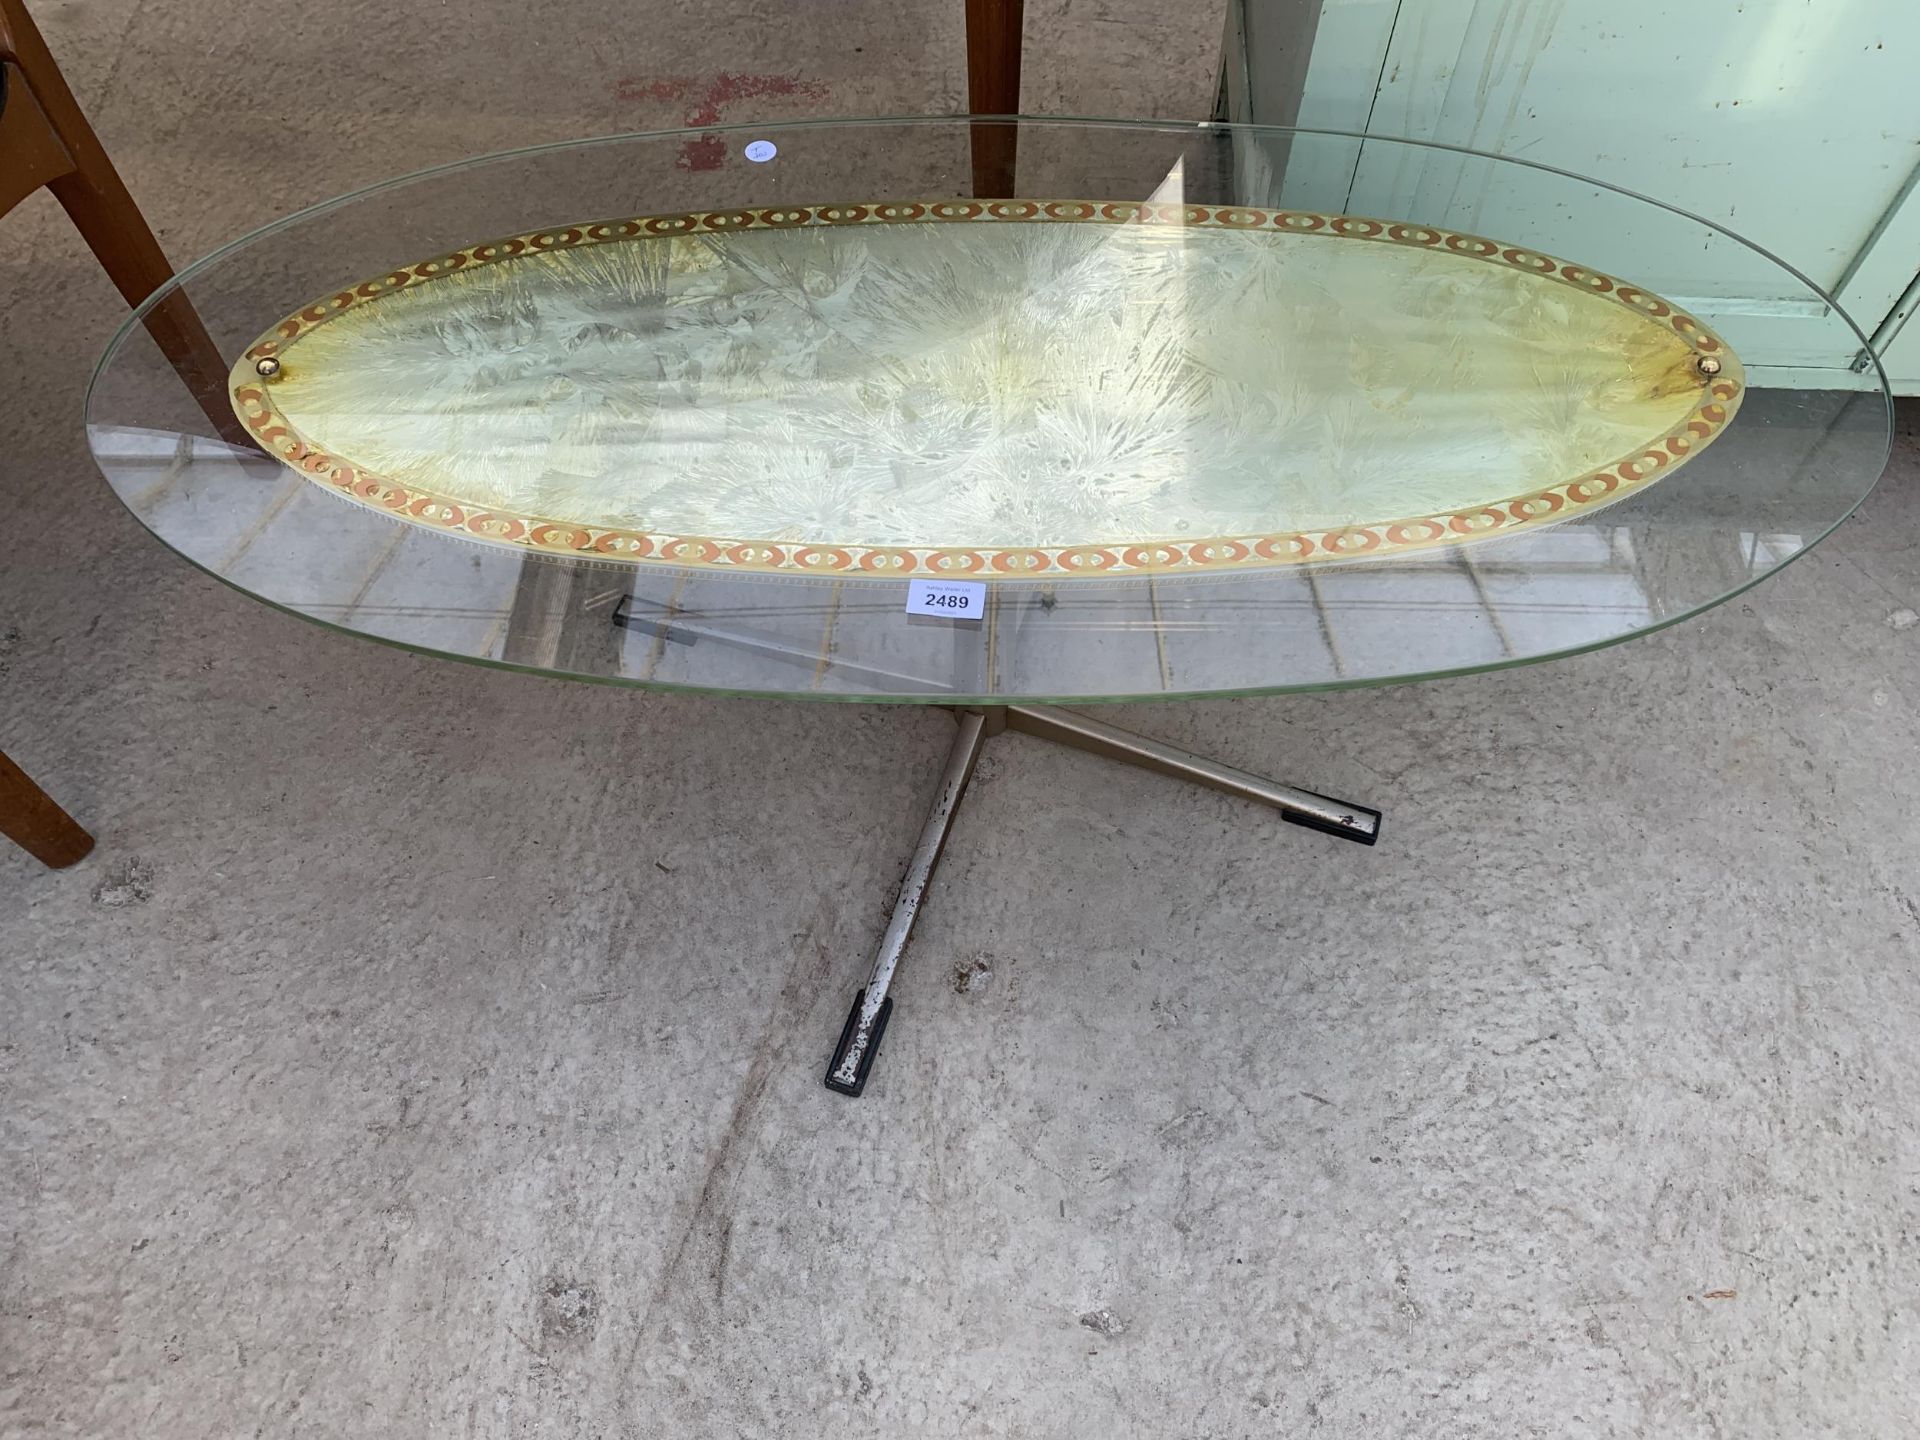 A RETRO 1970'S OVAL GLASS COFFEE TABLE, 38X17", ON ALLOY BASE